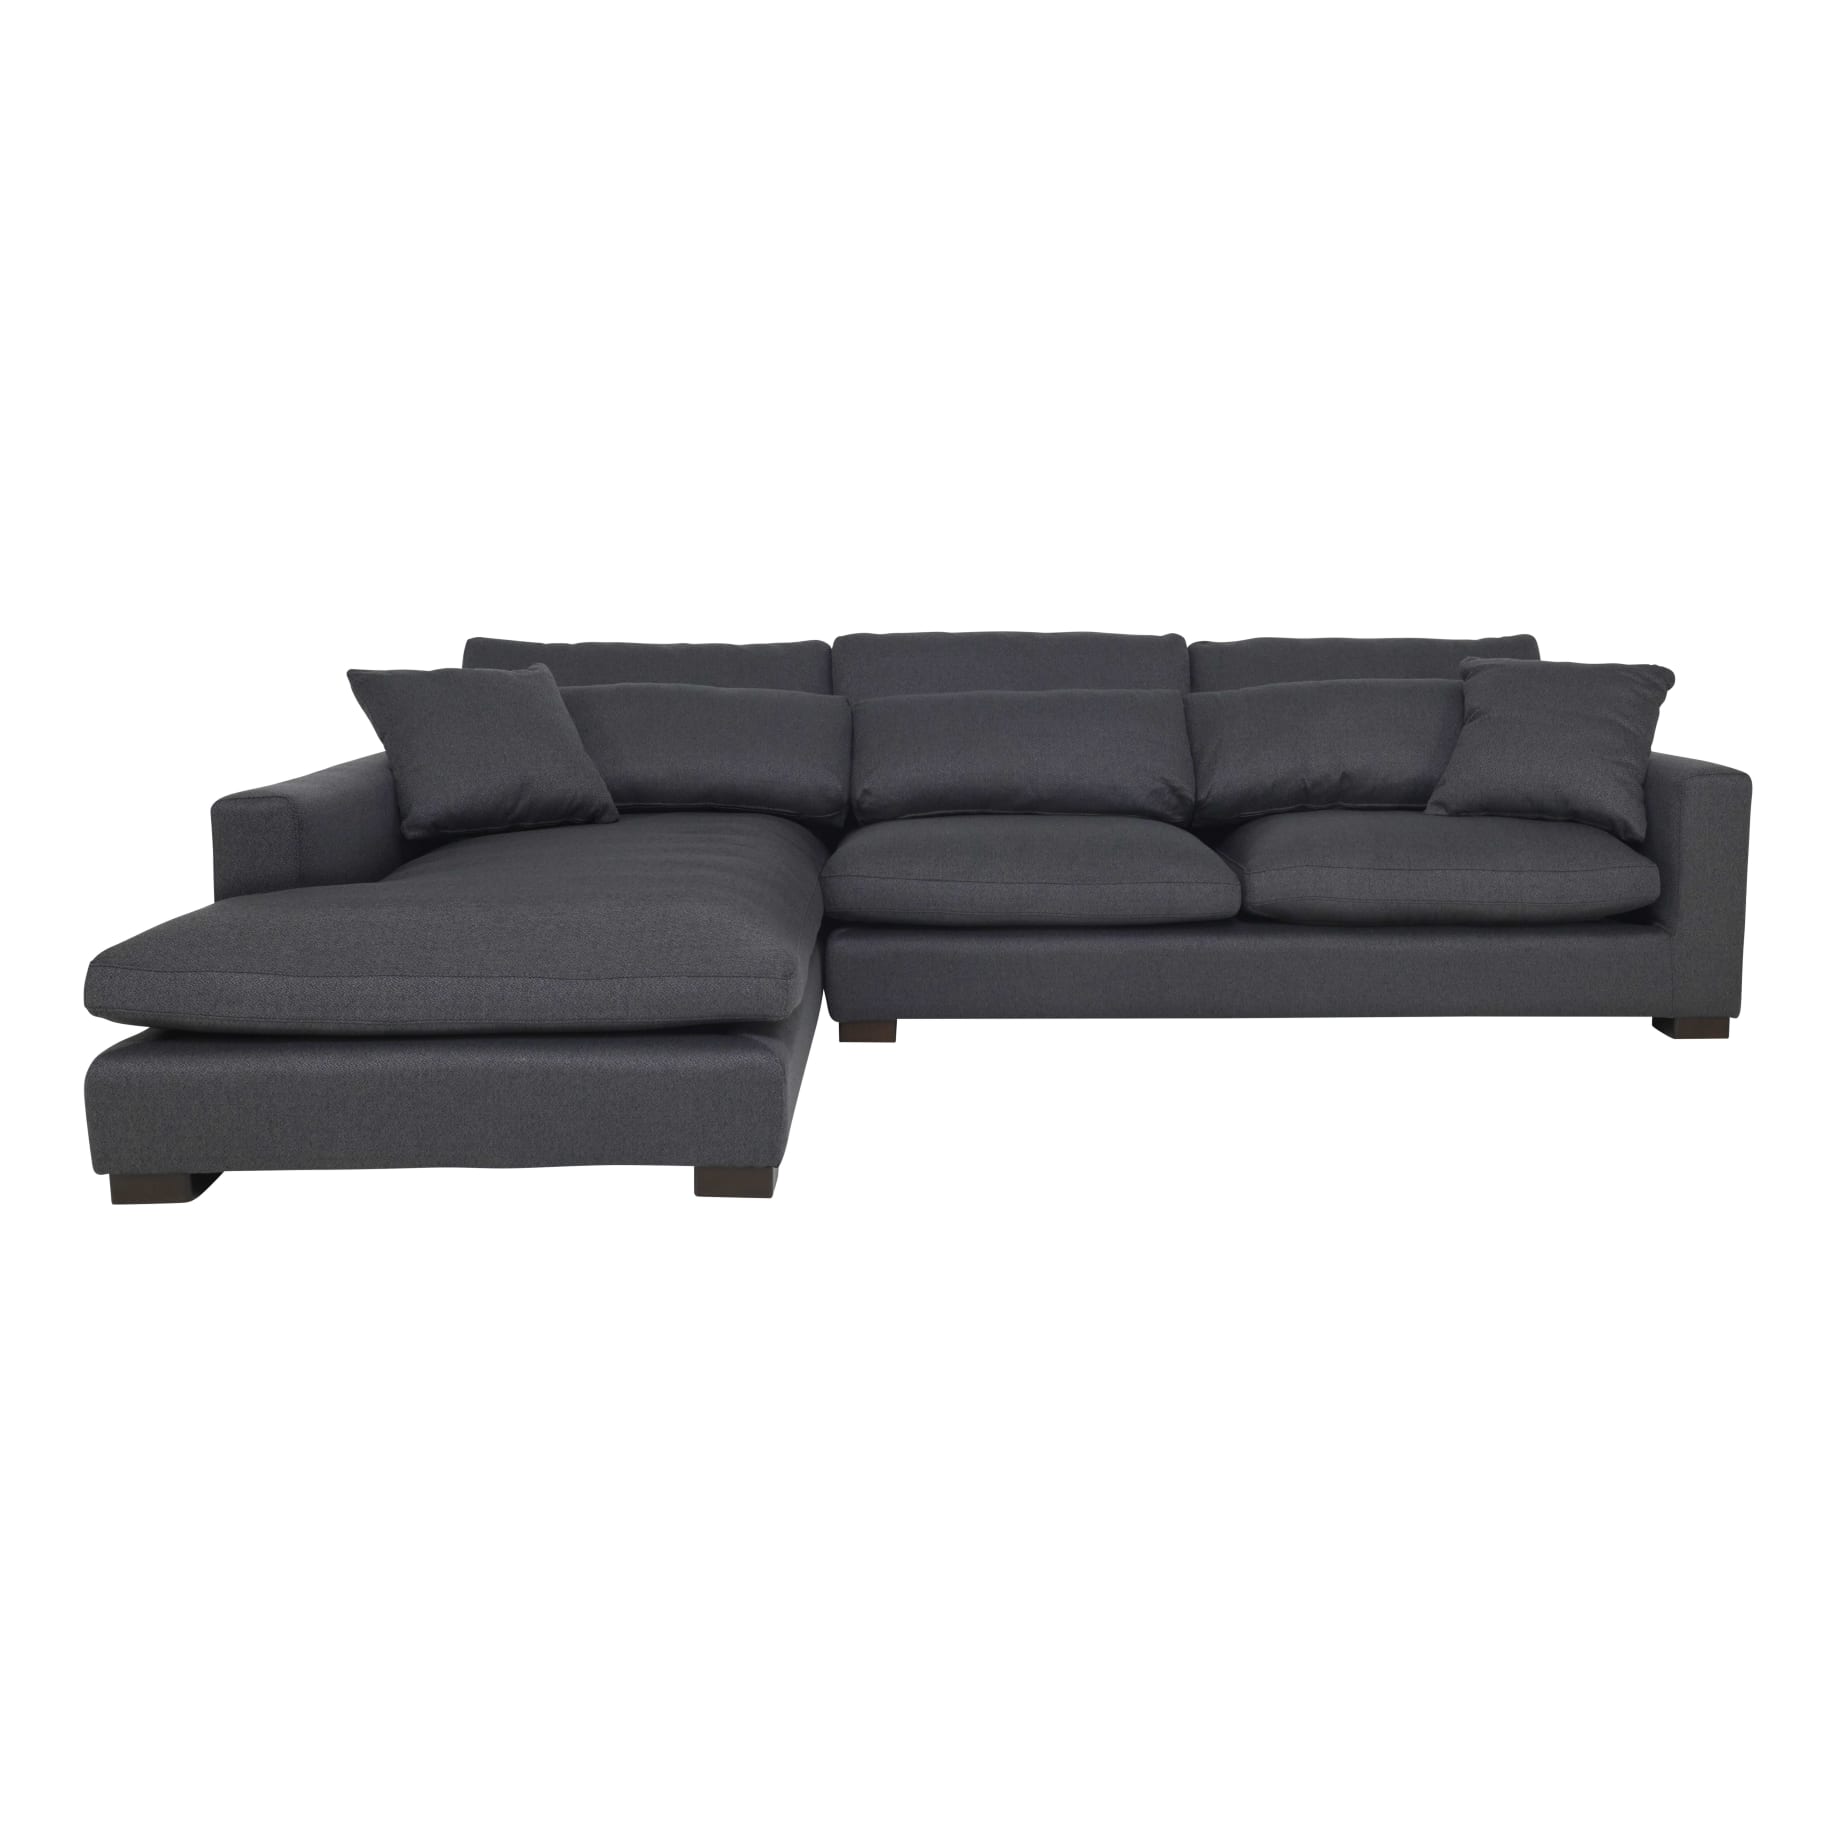 Cleo 3 Seater Sofa + Chaise LHF in Gusto Charcoal